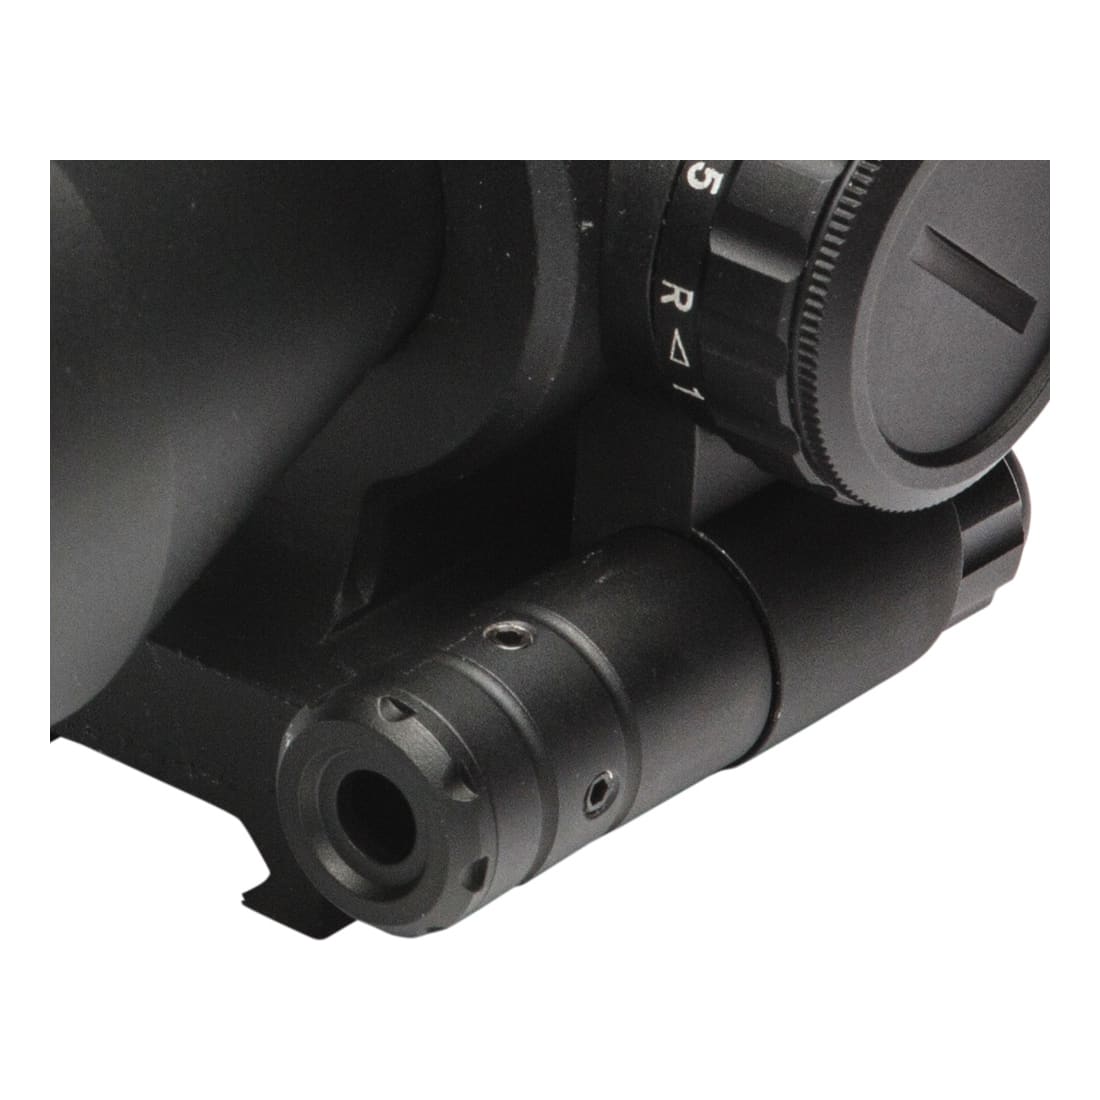 Firefield Barrage 2.5-10x40 Riflescope with Red Laser